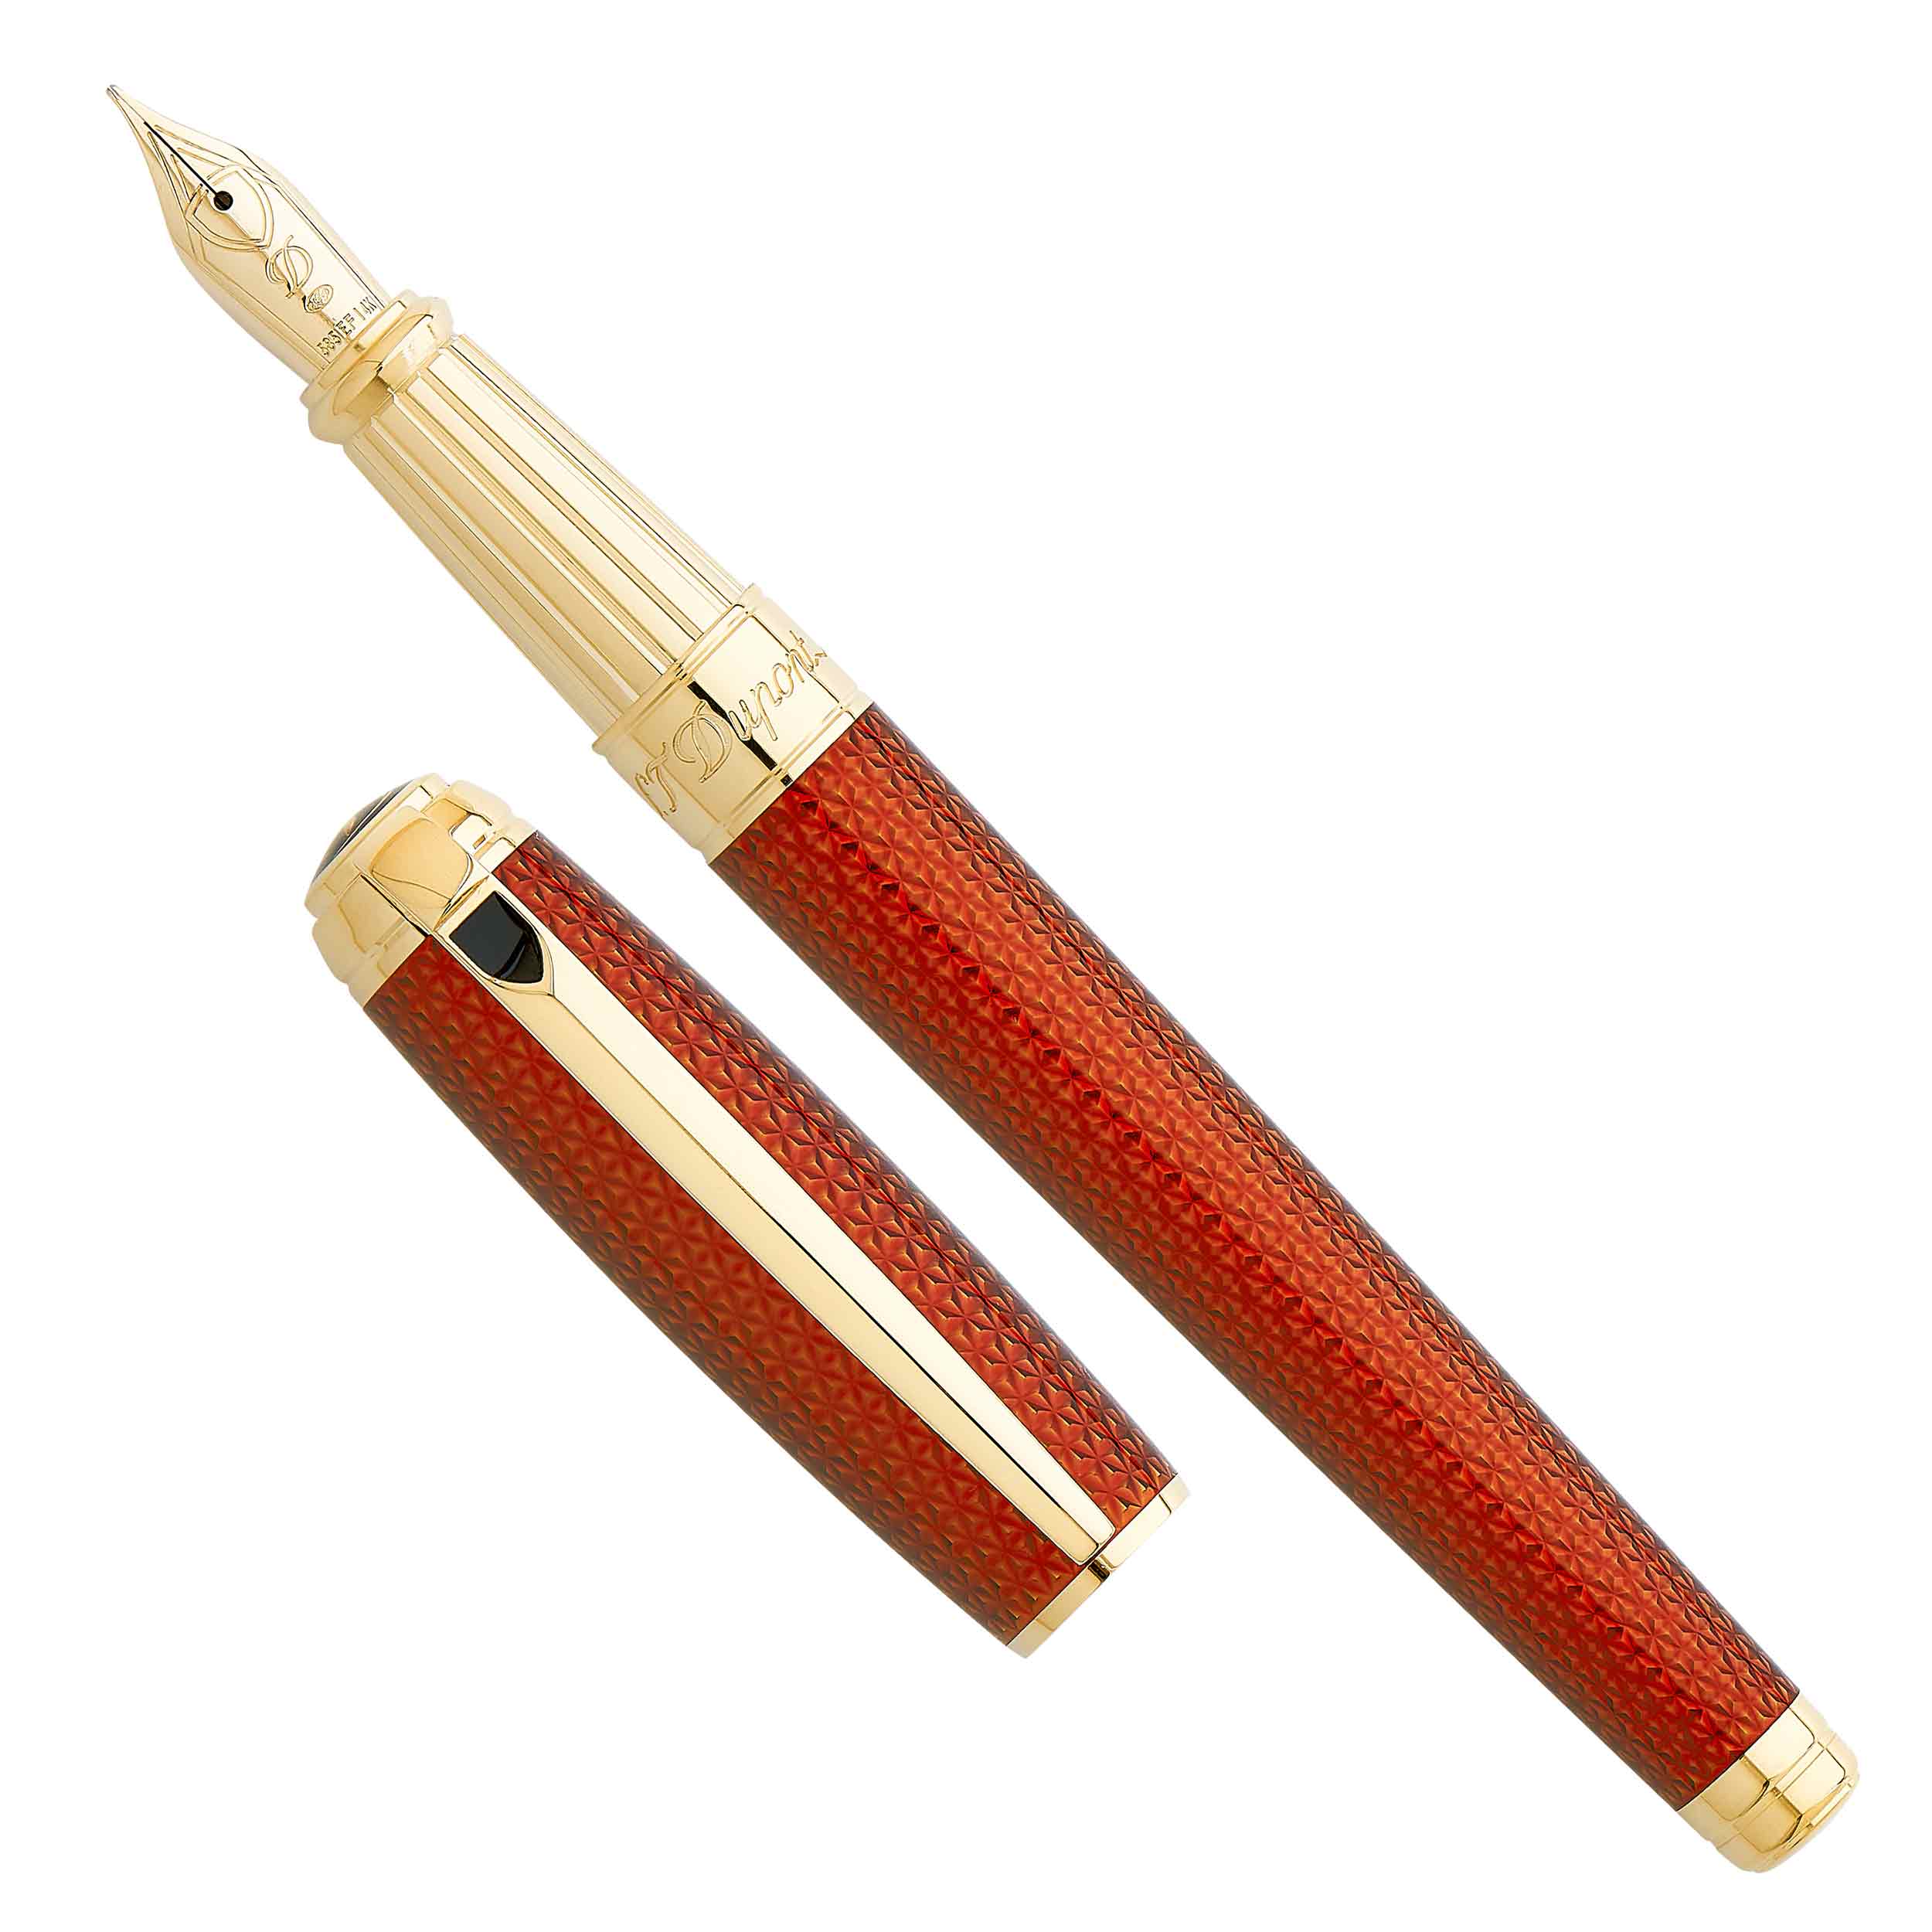 S.T. Dupont Line D Firehead Guilloche Large Fountain Pen - Amber, Gold Trim